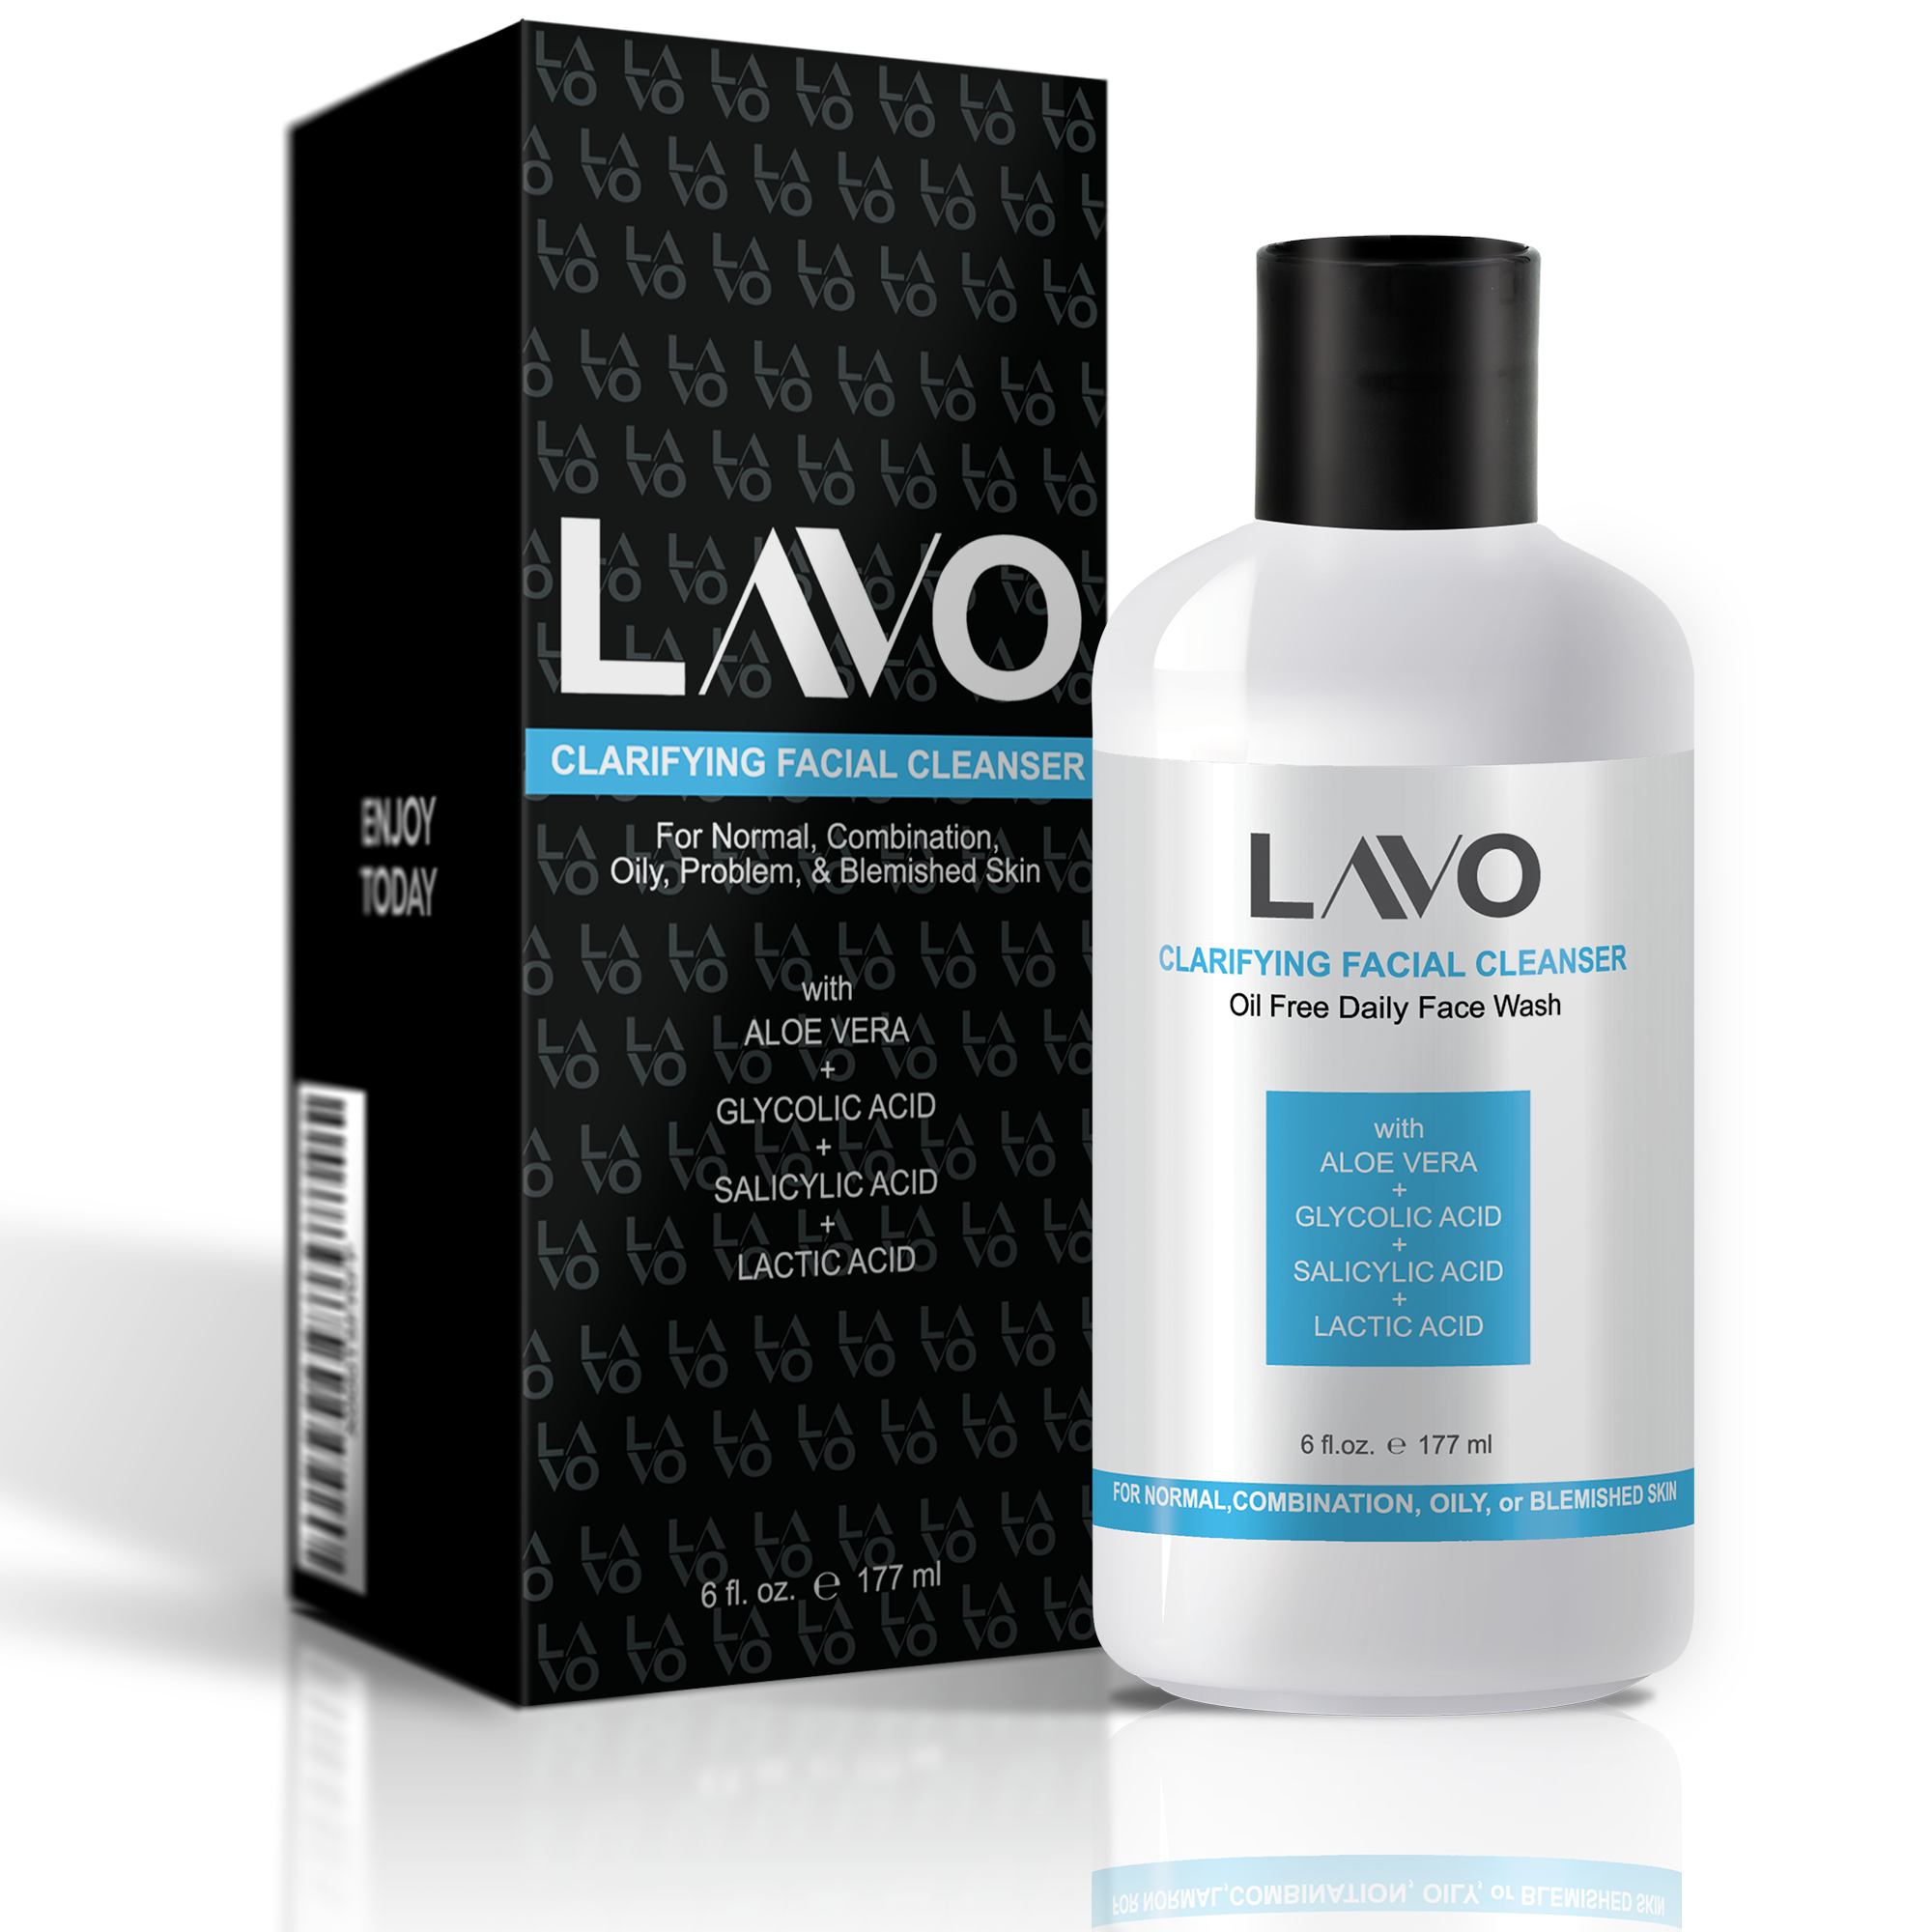 lavo clarifying facial cleanser